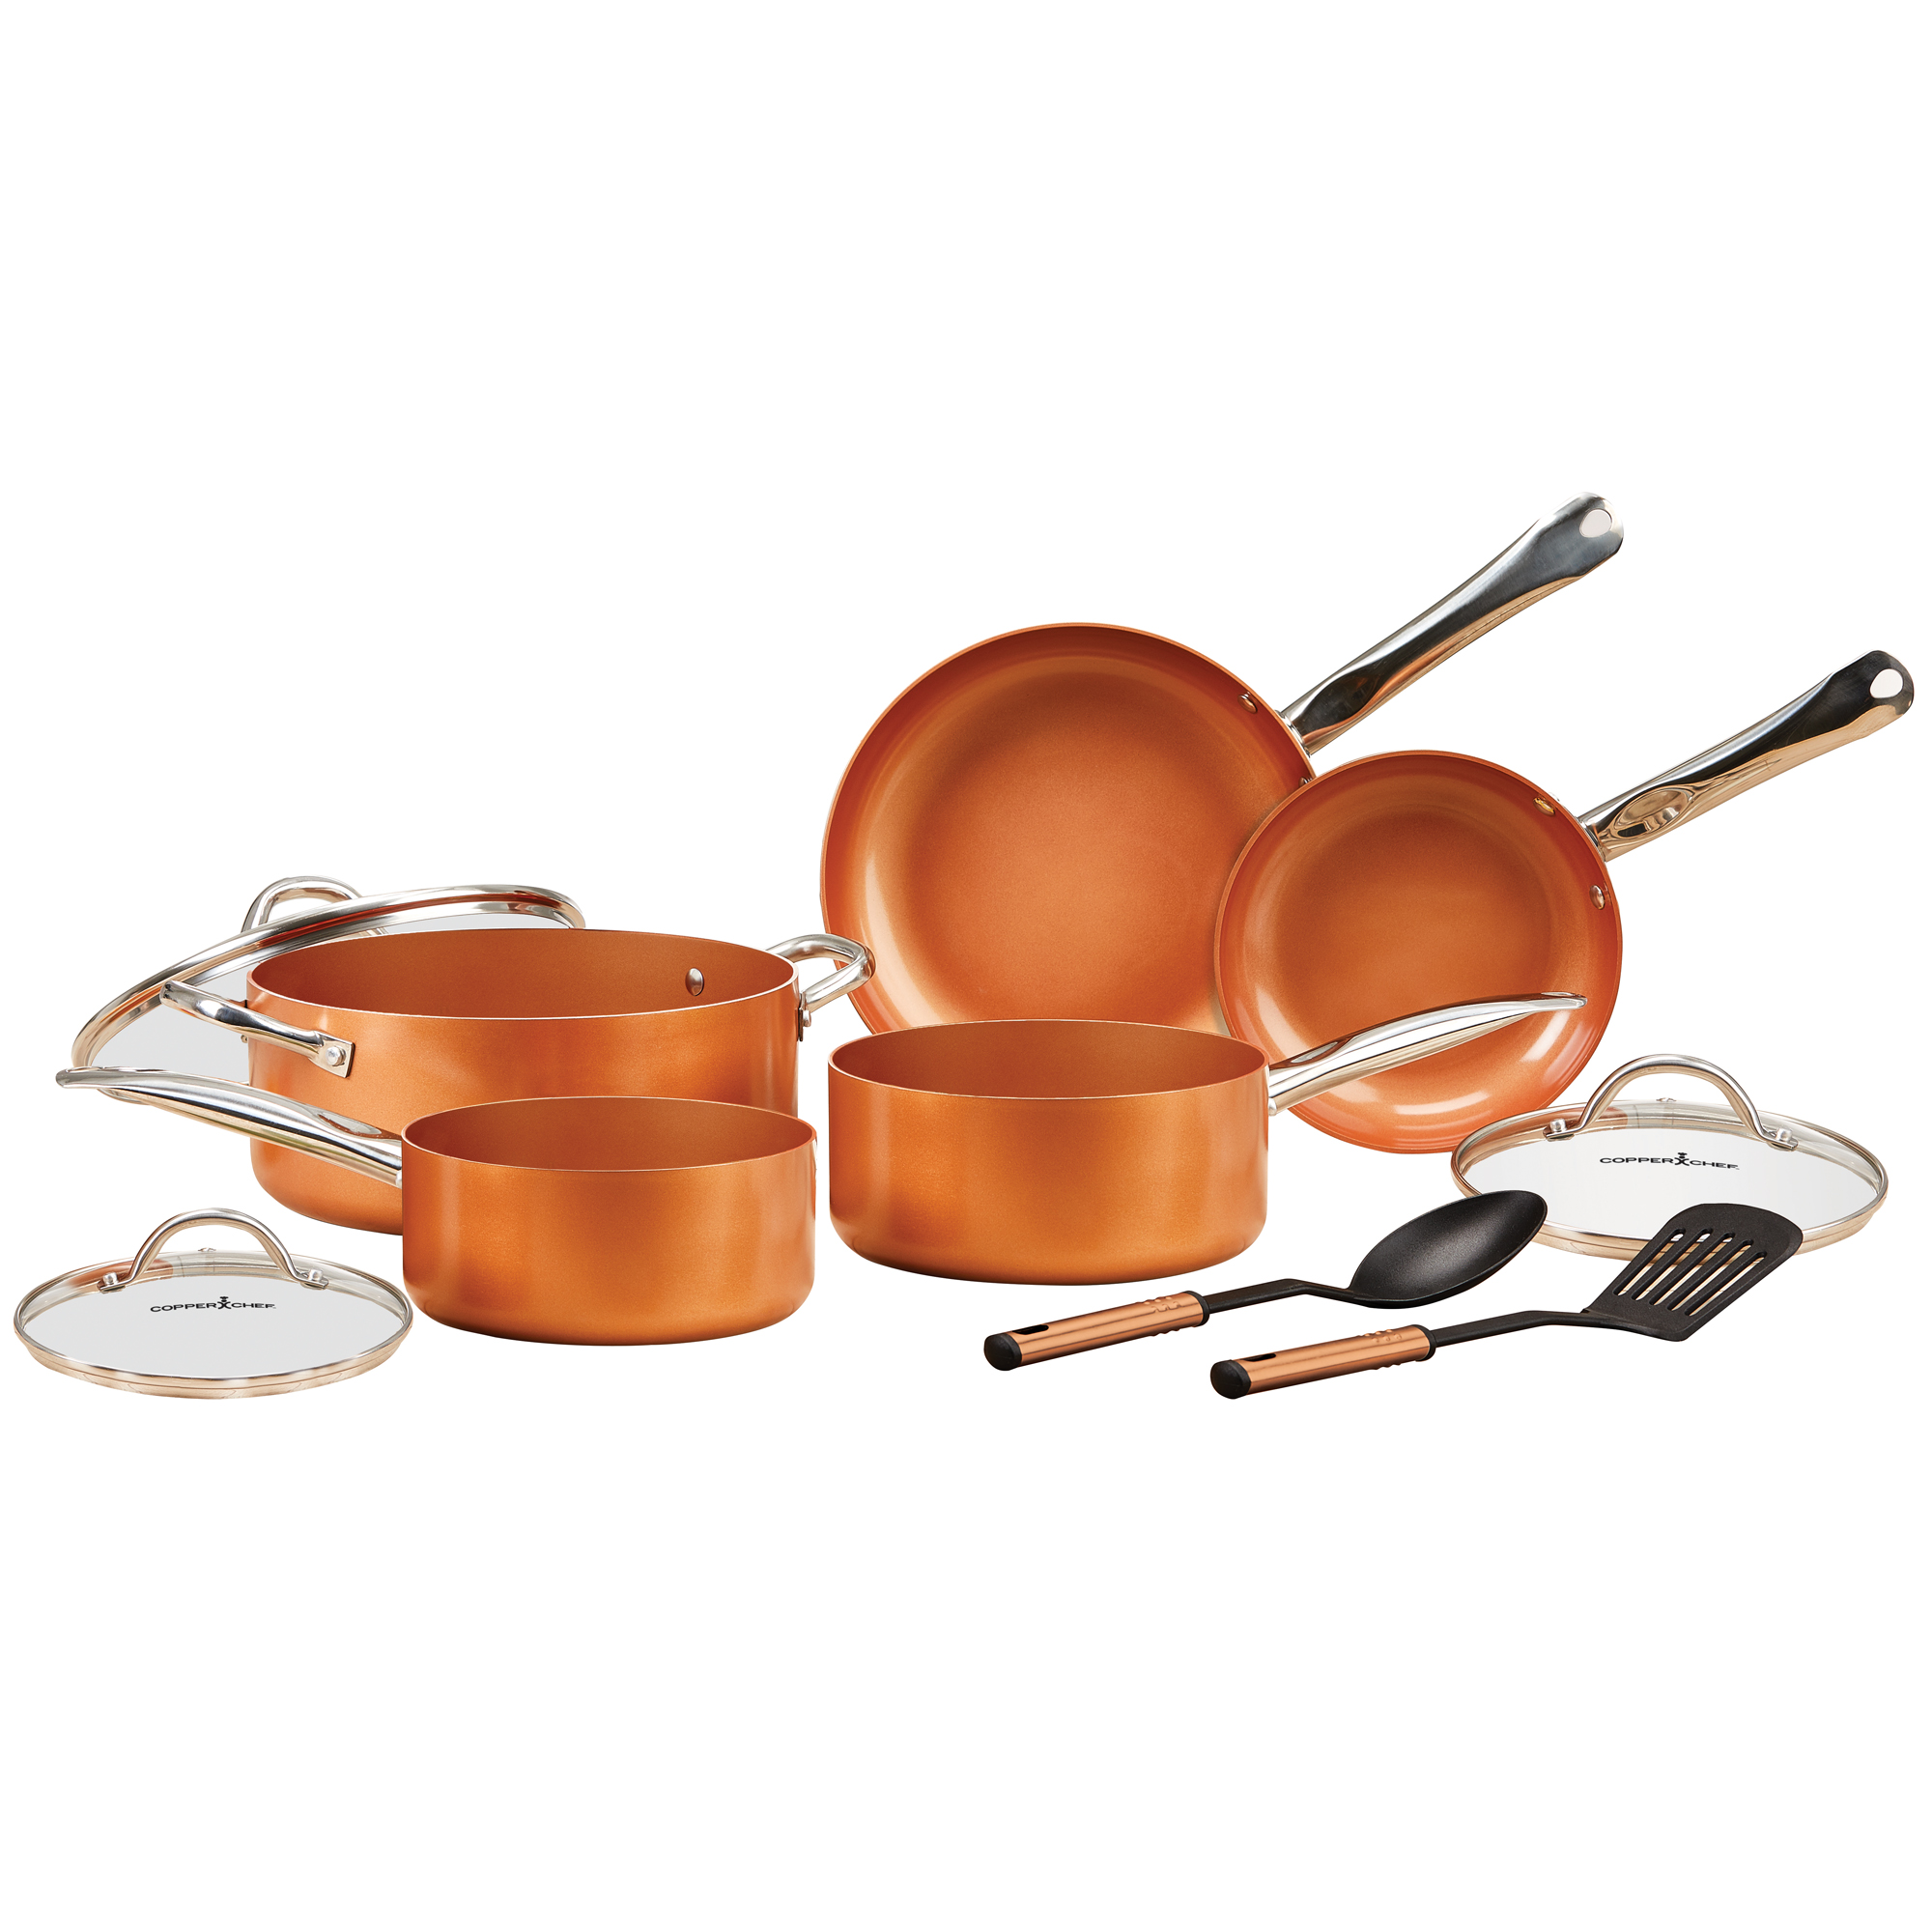 Copper Chef 10 Piece Nonstick Pan Set, with CeramiTech - image 1 of 5